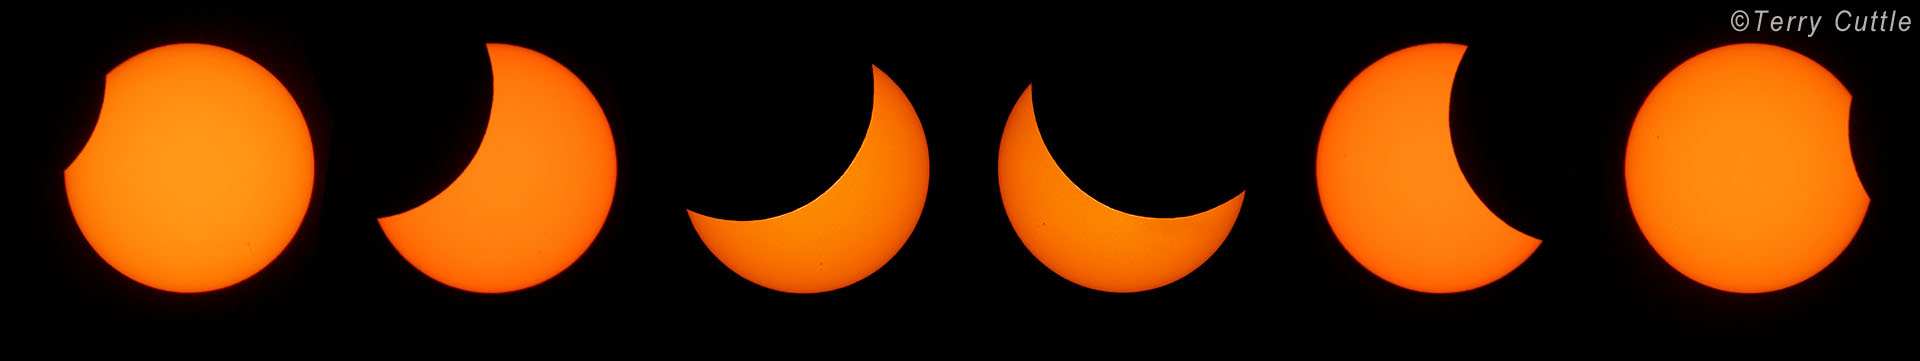 A series of images show an increasing part of the Sun being covered by the Moon giving the Sun a crescent shape. This increases to a maximum then reduces in coverage as the Moon continues to move across the Sun.